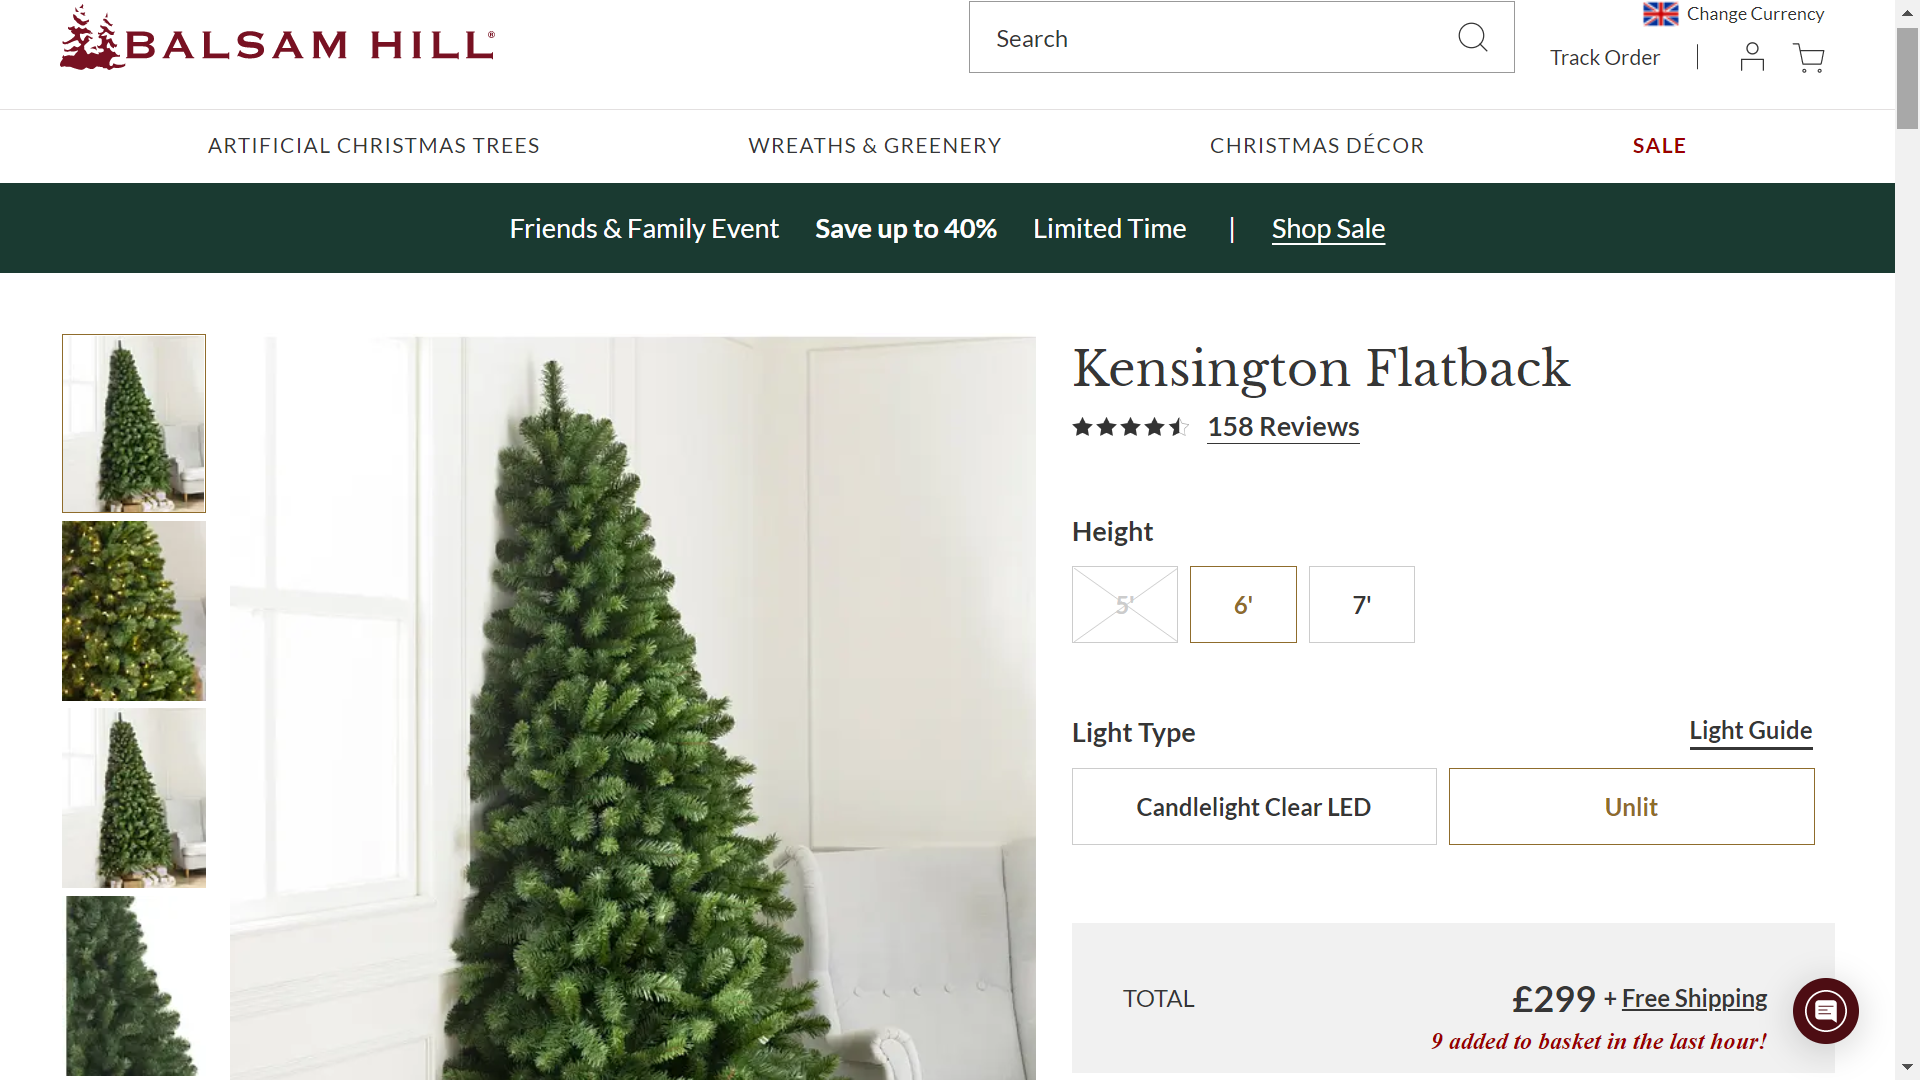 BH (The worlds leading Christmas Tree Brand) Kensington Flatback 6' Tree Unlit RRP £299.00. Our - Image 2 of 2